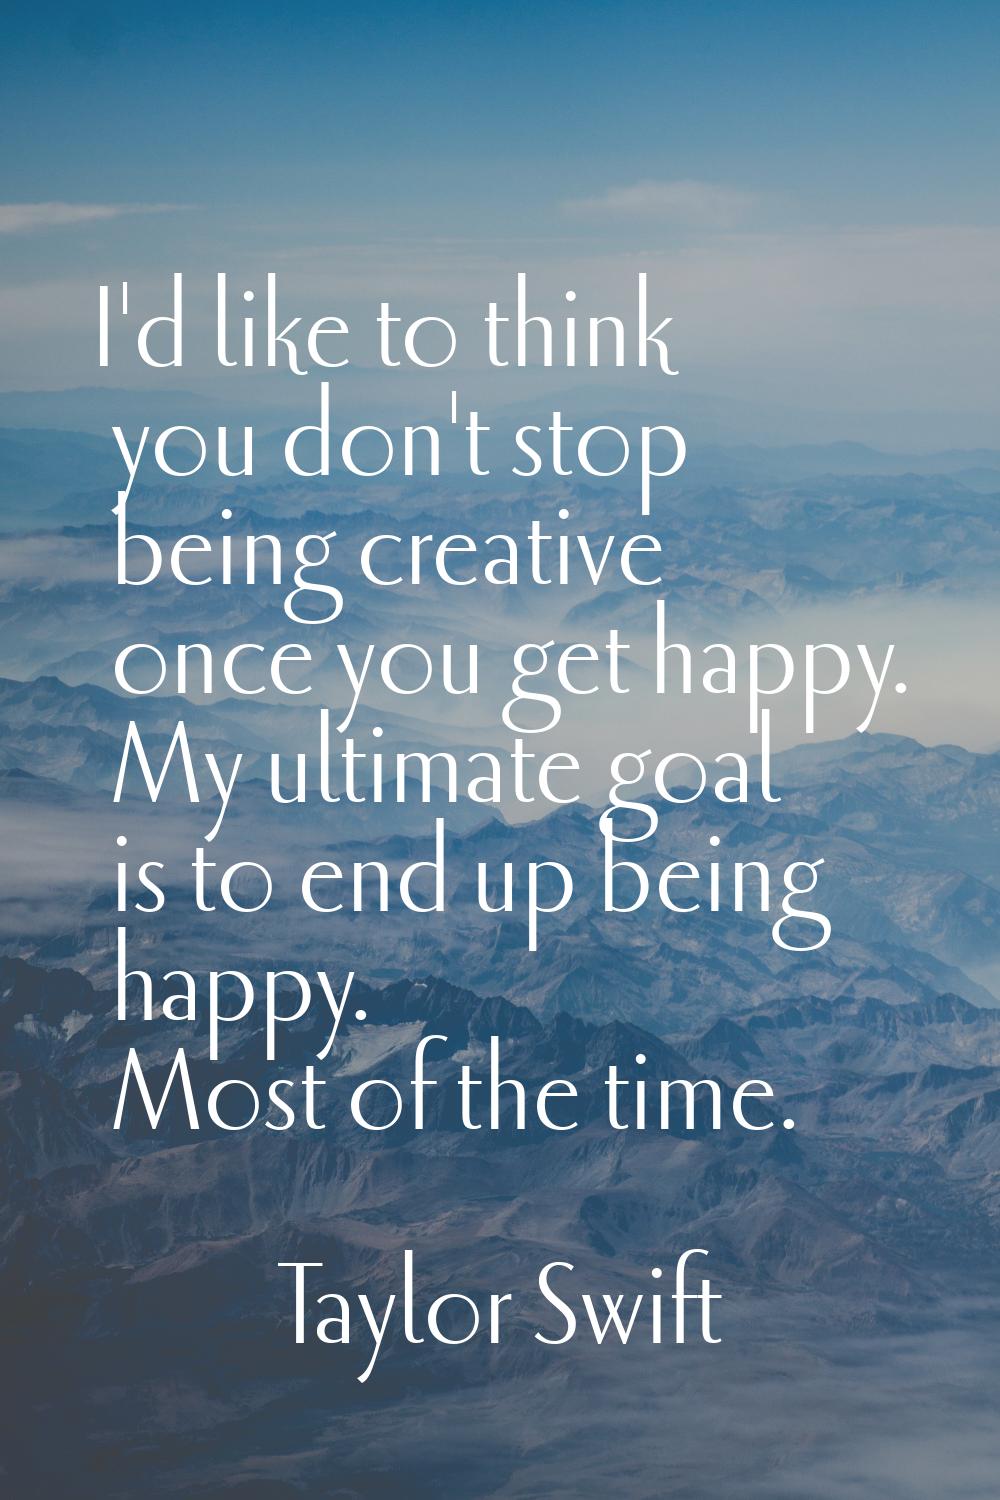 I'd like to think you don't stop being creative once you get happy. My ultimate goal is to end up b